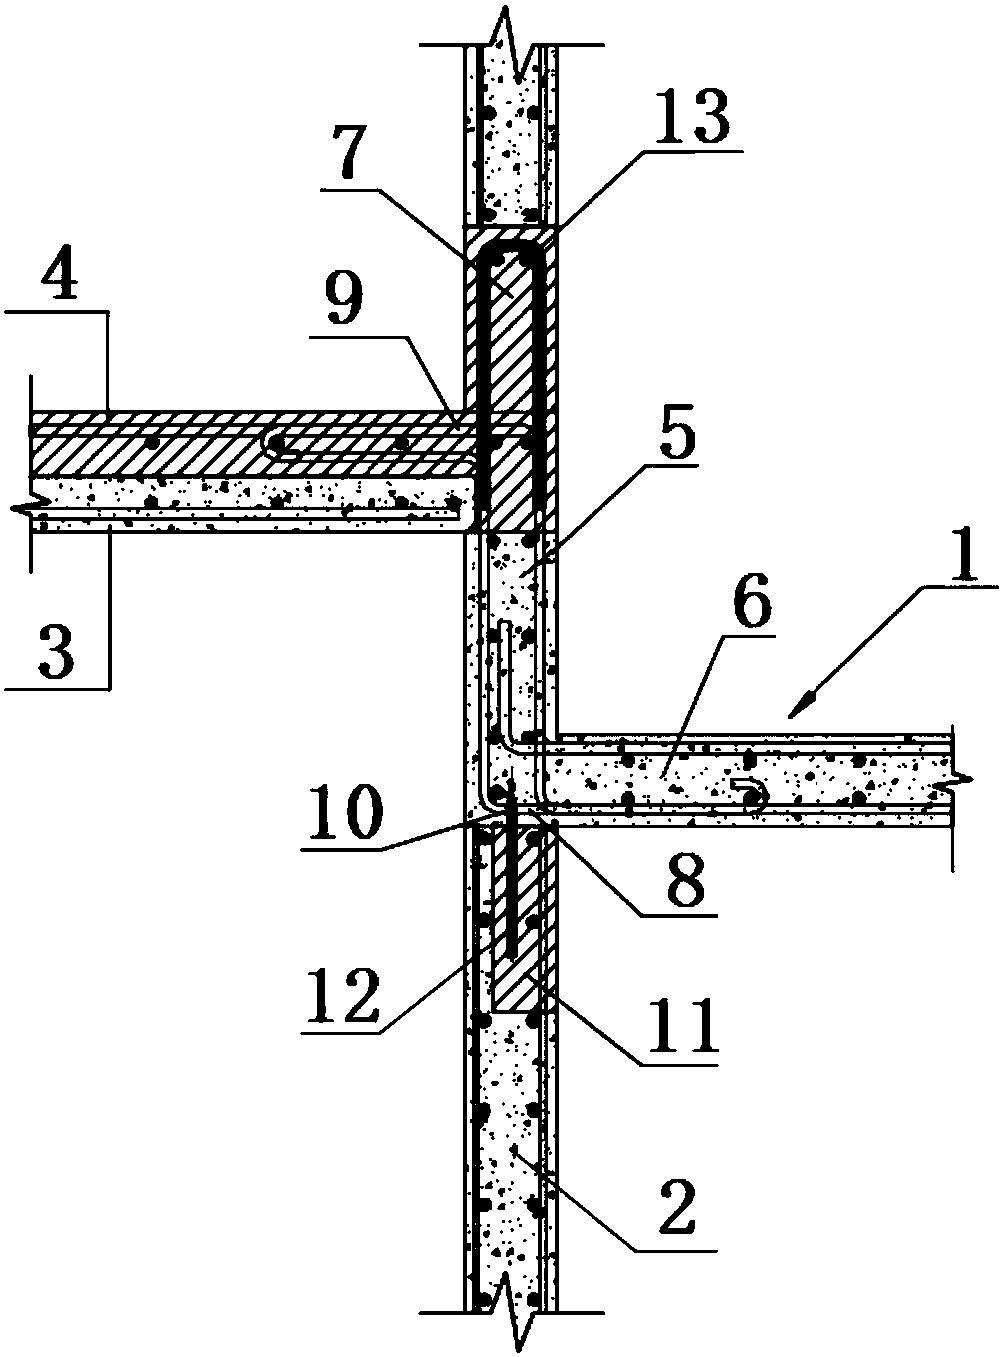 Connecting structure of caisson and partition wall and construction method of connecting structure